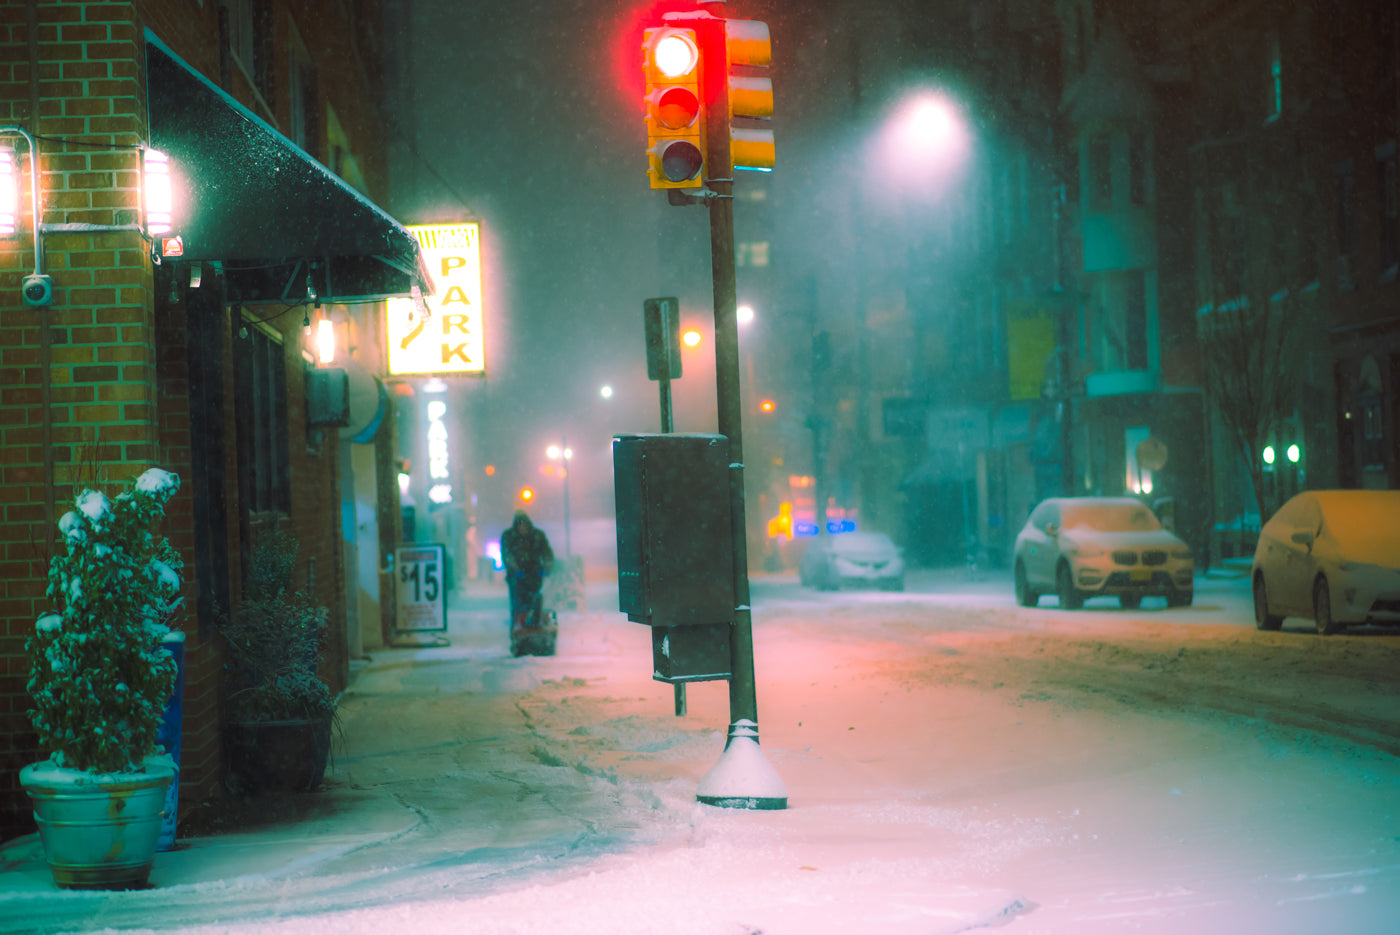 Photograph of city street covered in snow